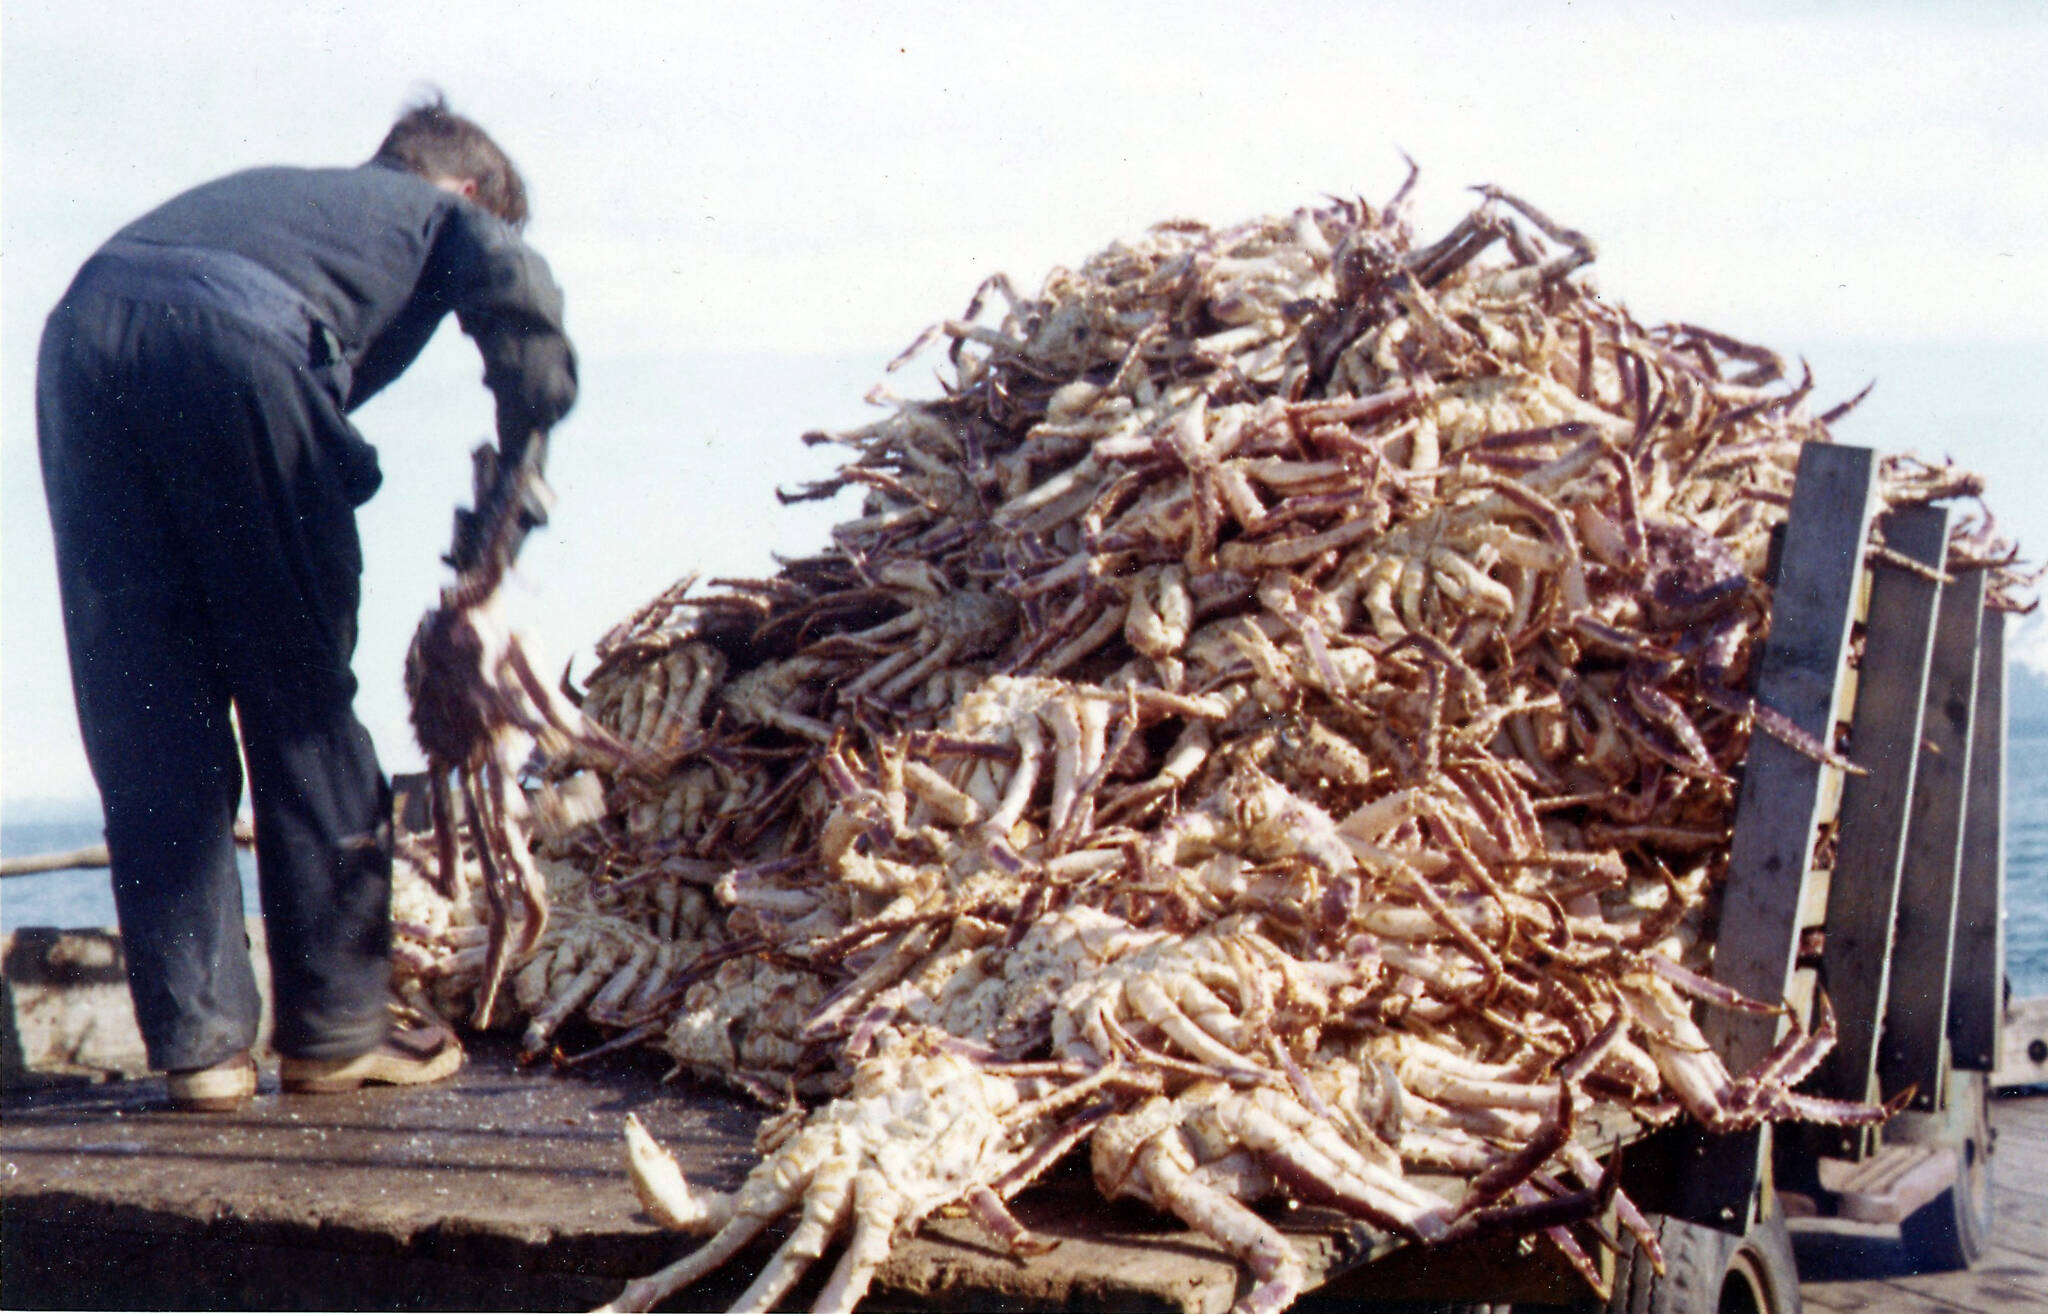 The bounty of the sea in Homer once included mounds of king crab, which the Fengers enjoyed along with shrimp and salmon and halibut. This photo was taken in 1964 at the Homer Spit dock. (Photo courtesy of the Fenger Family Collection)